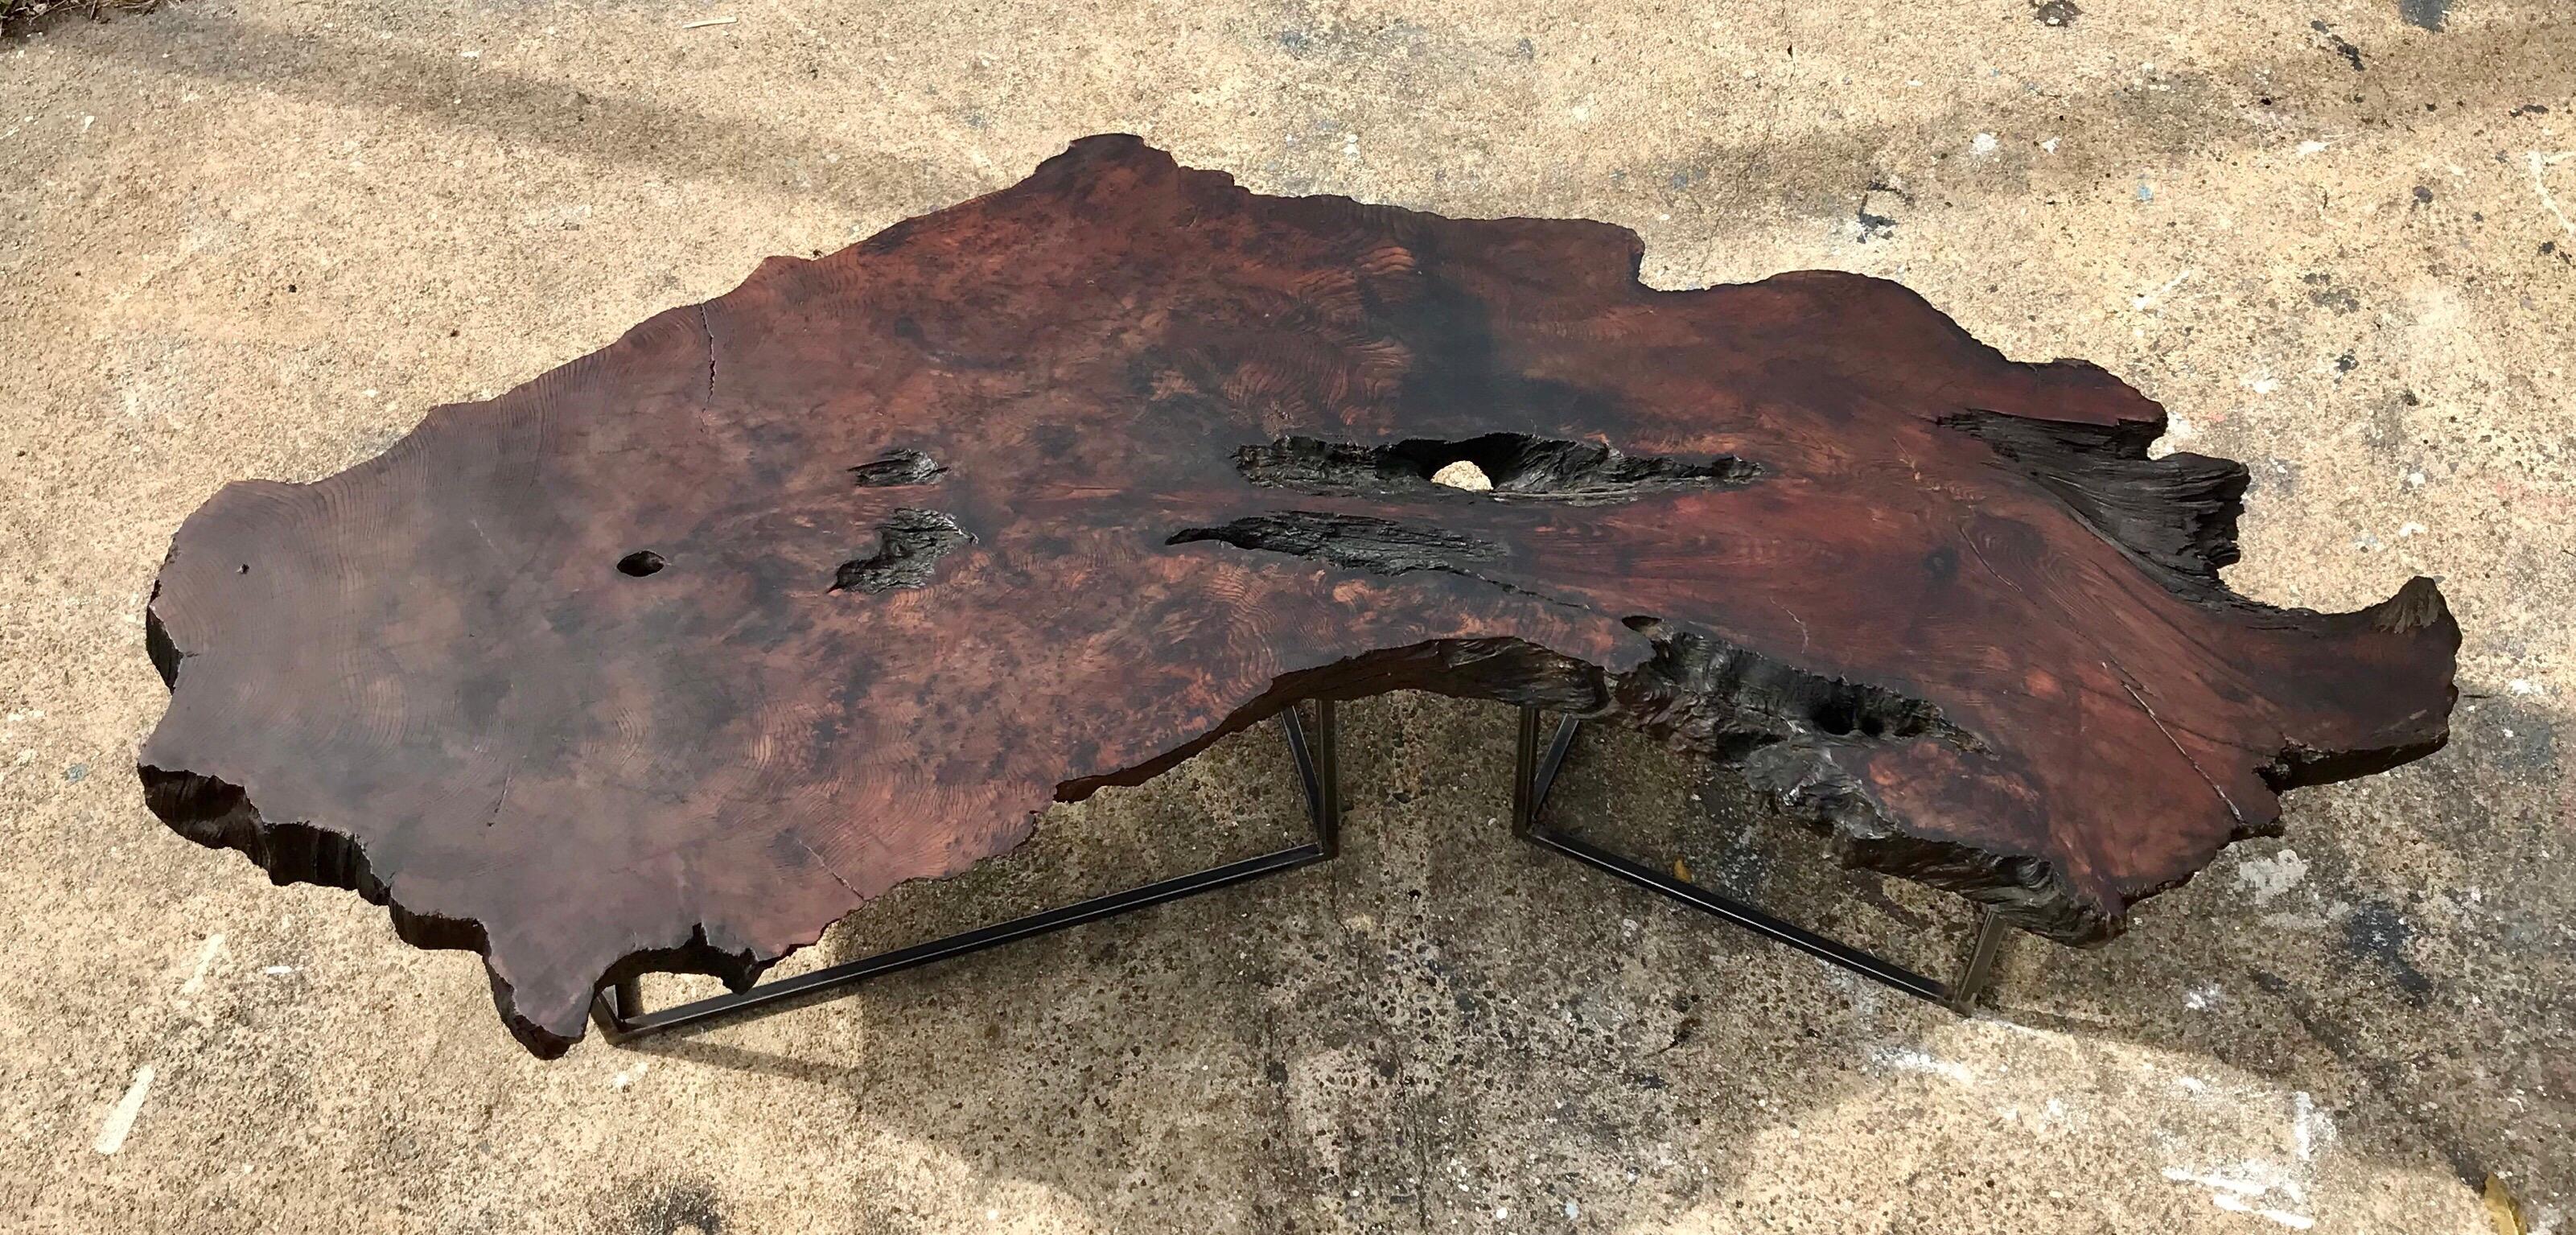 An epic and rare California redwood slab coffee table on custom iron bases. The large geomorphic live edge tabletop is a stunning example of one of our at risk national treasures. Organic modern living at its best for your consideration. Additional